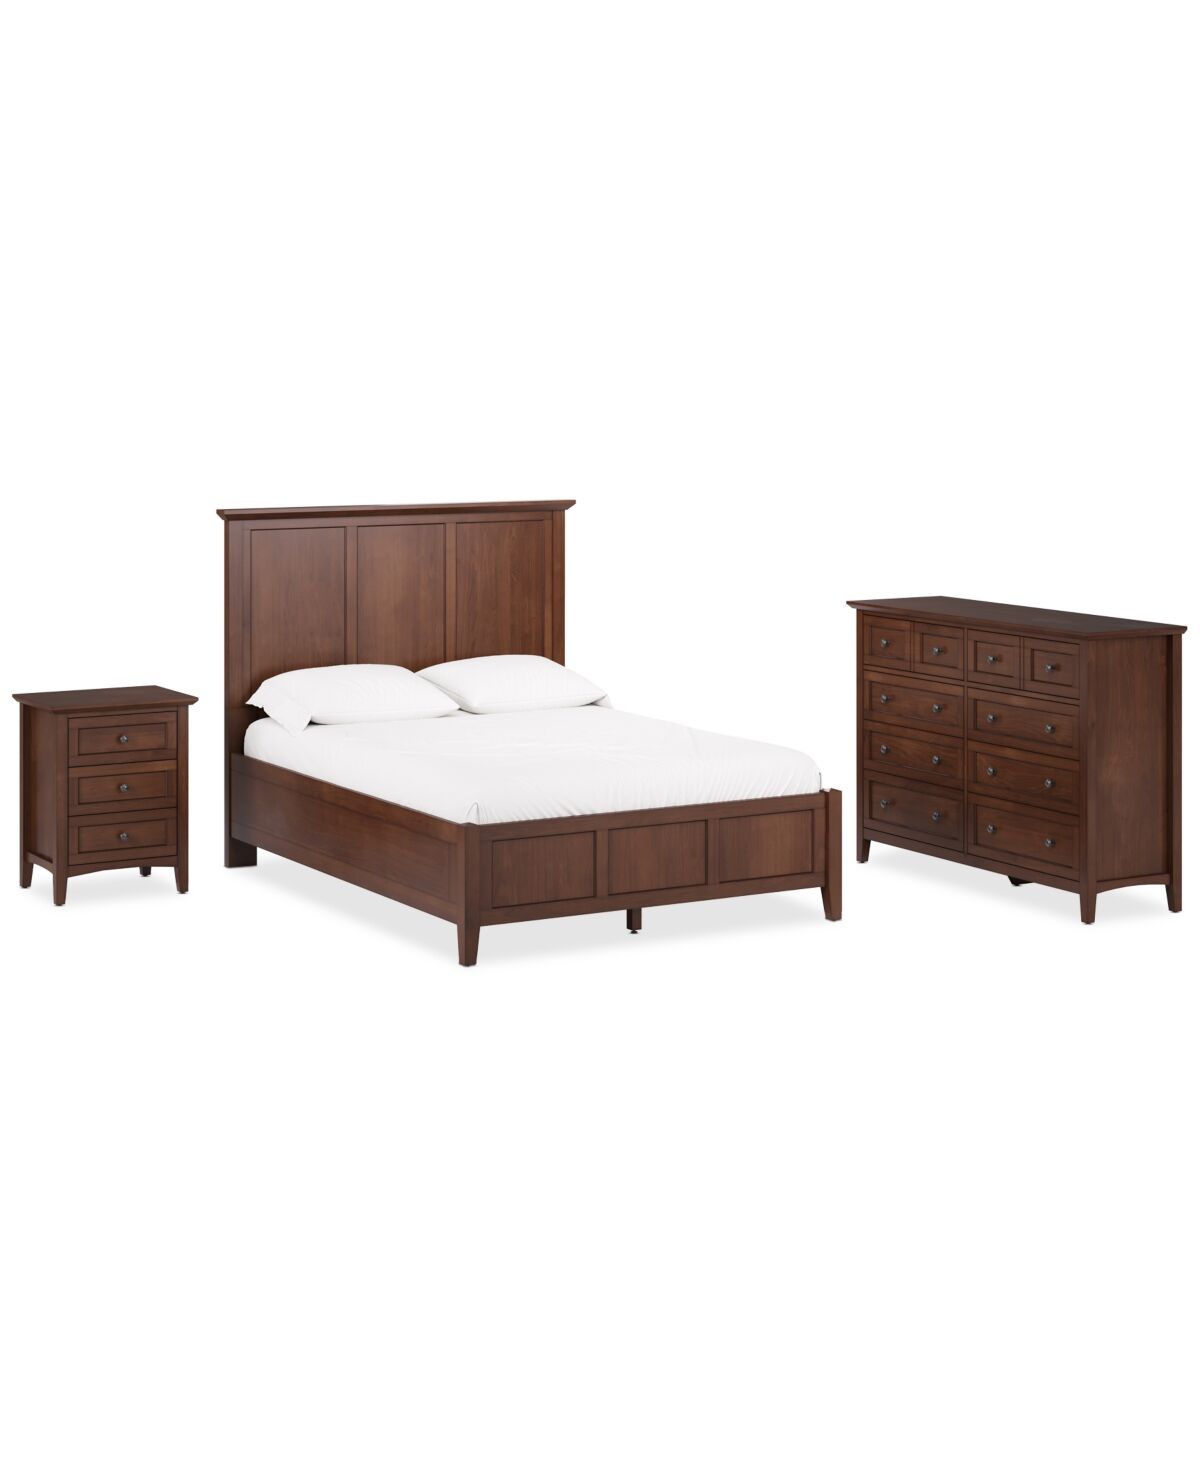 Furniture Hedworth California King Bed 3pc (California King Bed + Dresser + Nightstand) - Brown